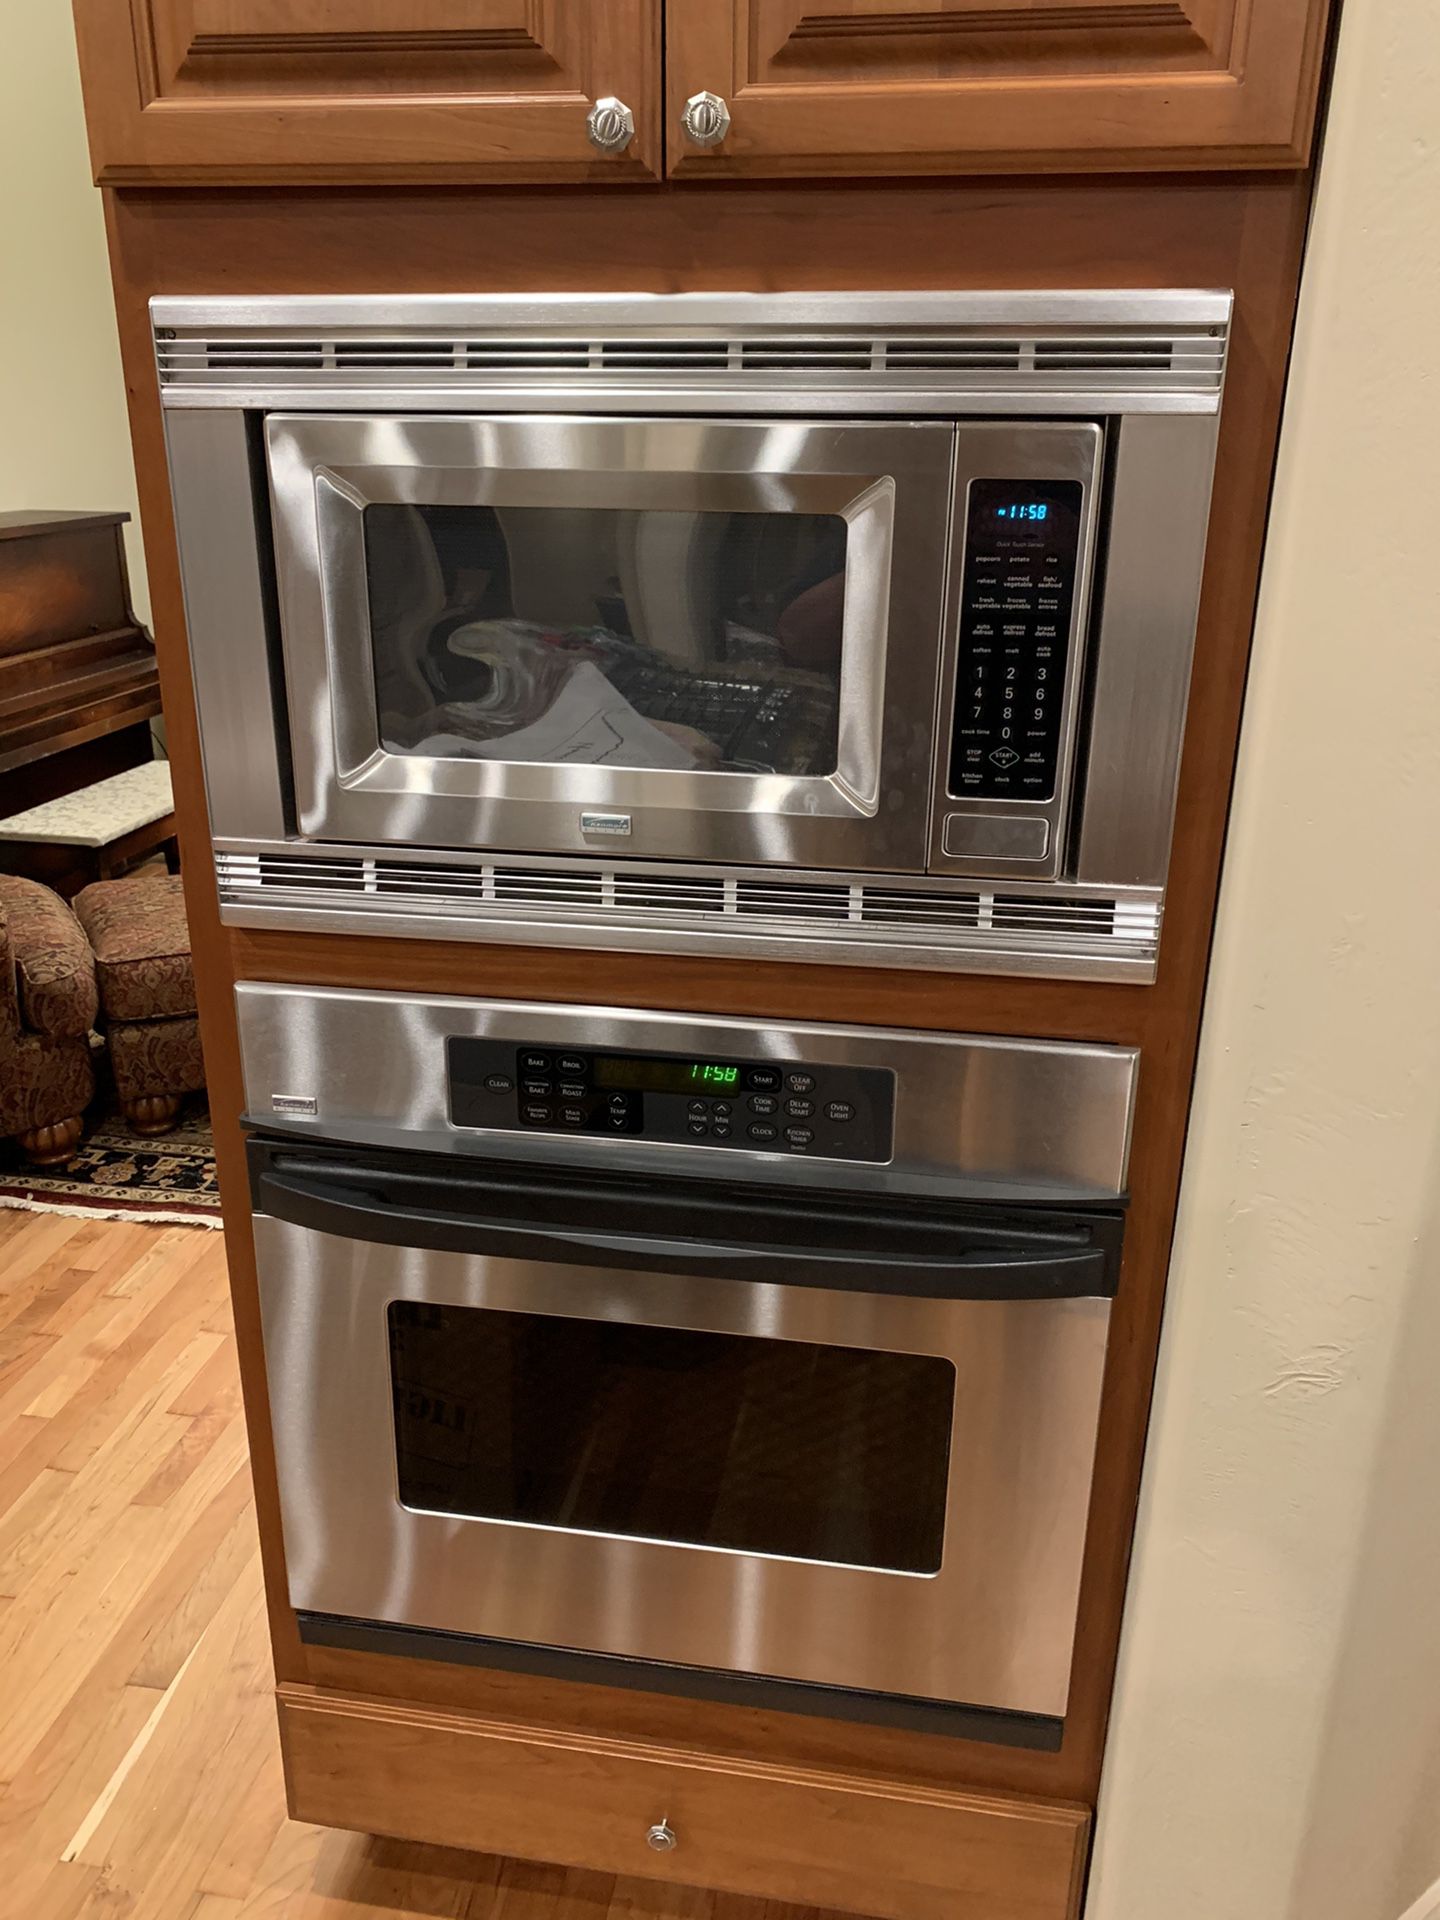 Kenmore Elite microwave and oven